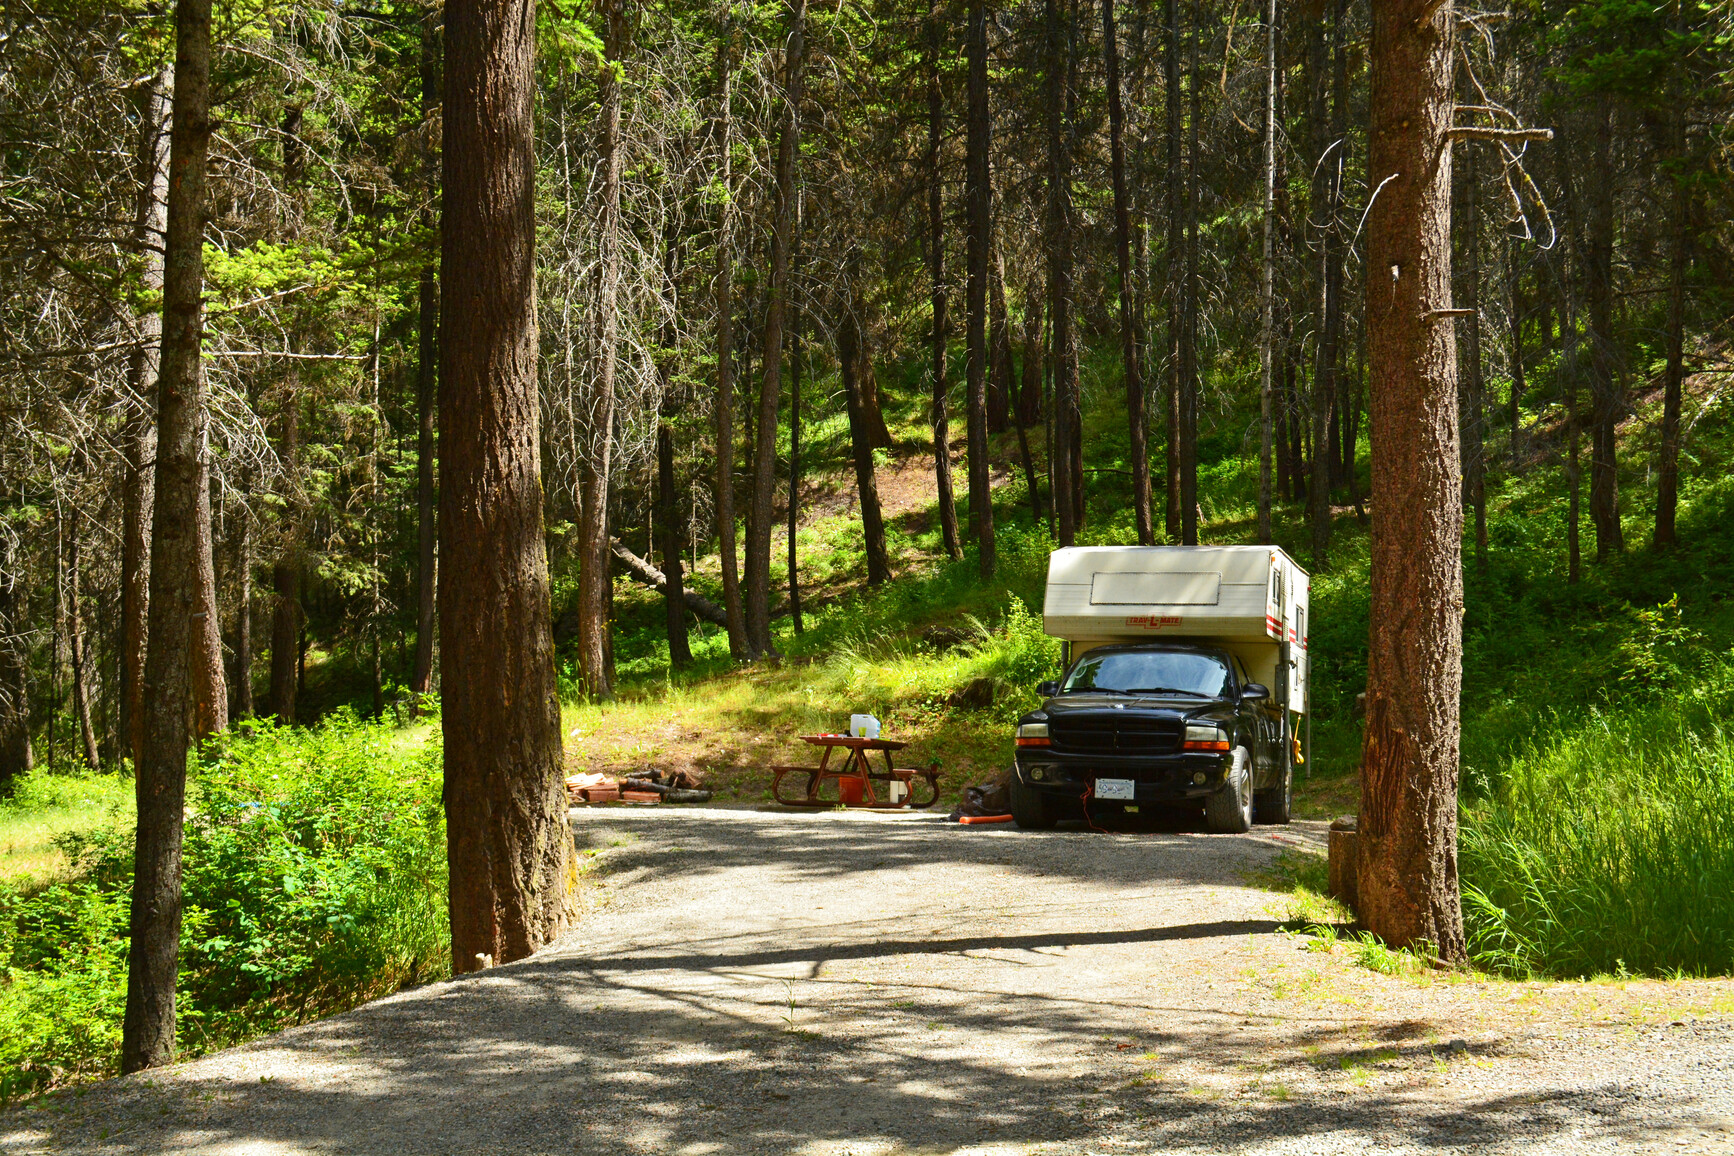 A campsite with a truck, camper and picnic table surrounded by trees and forest.